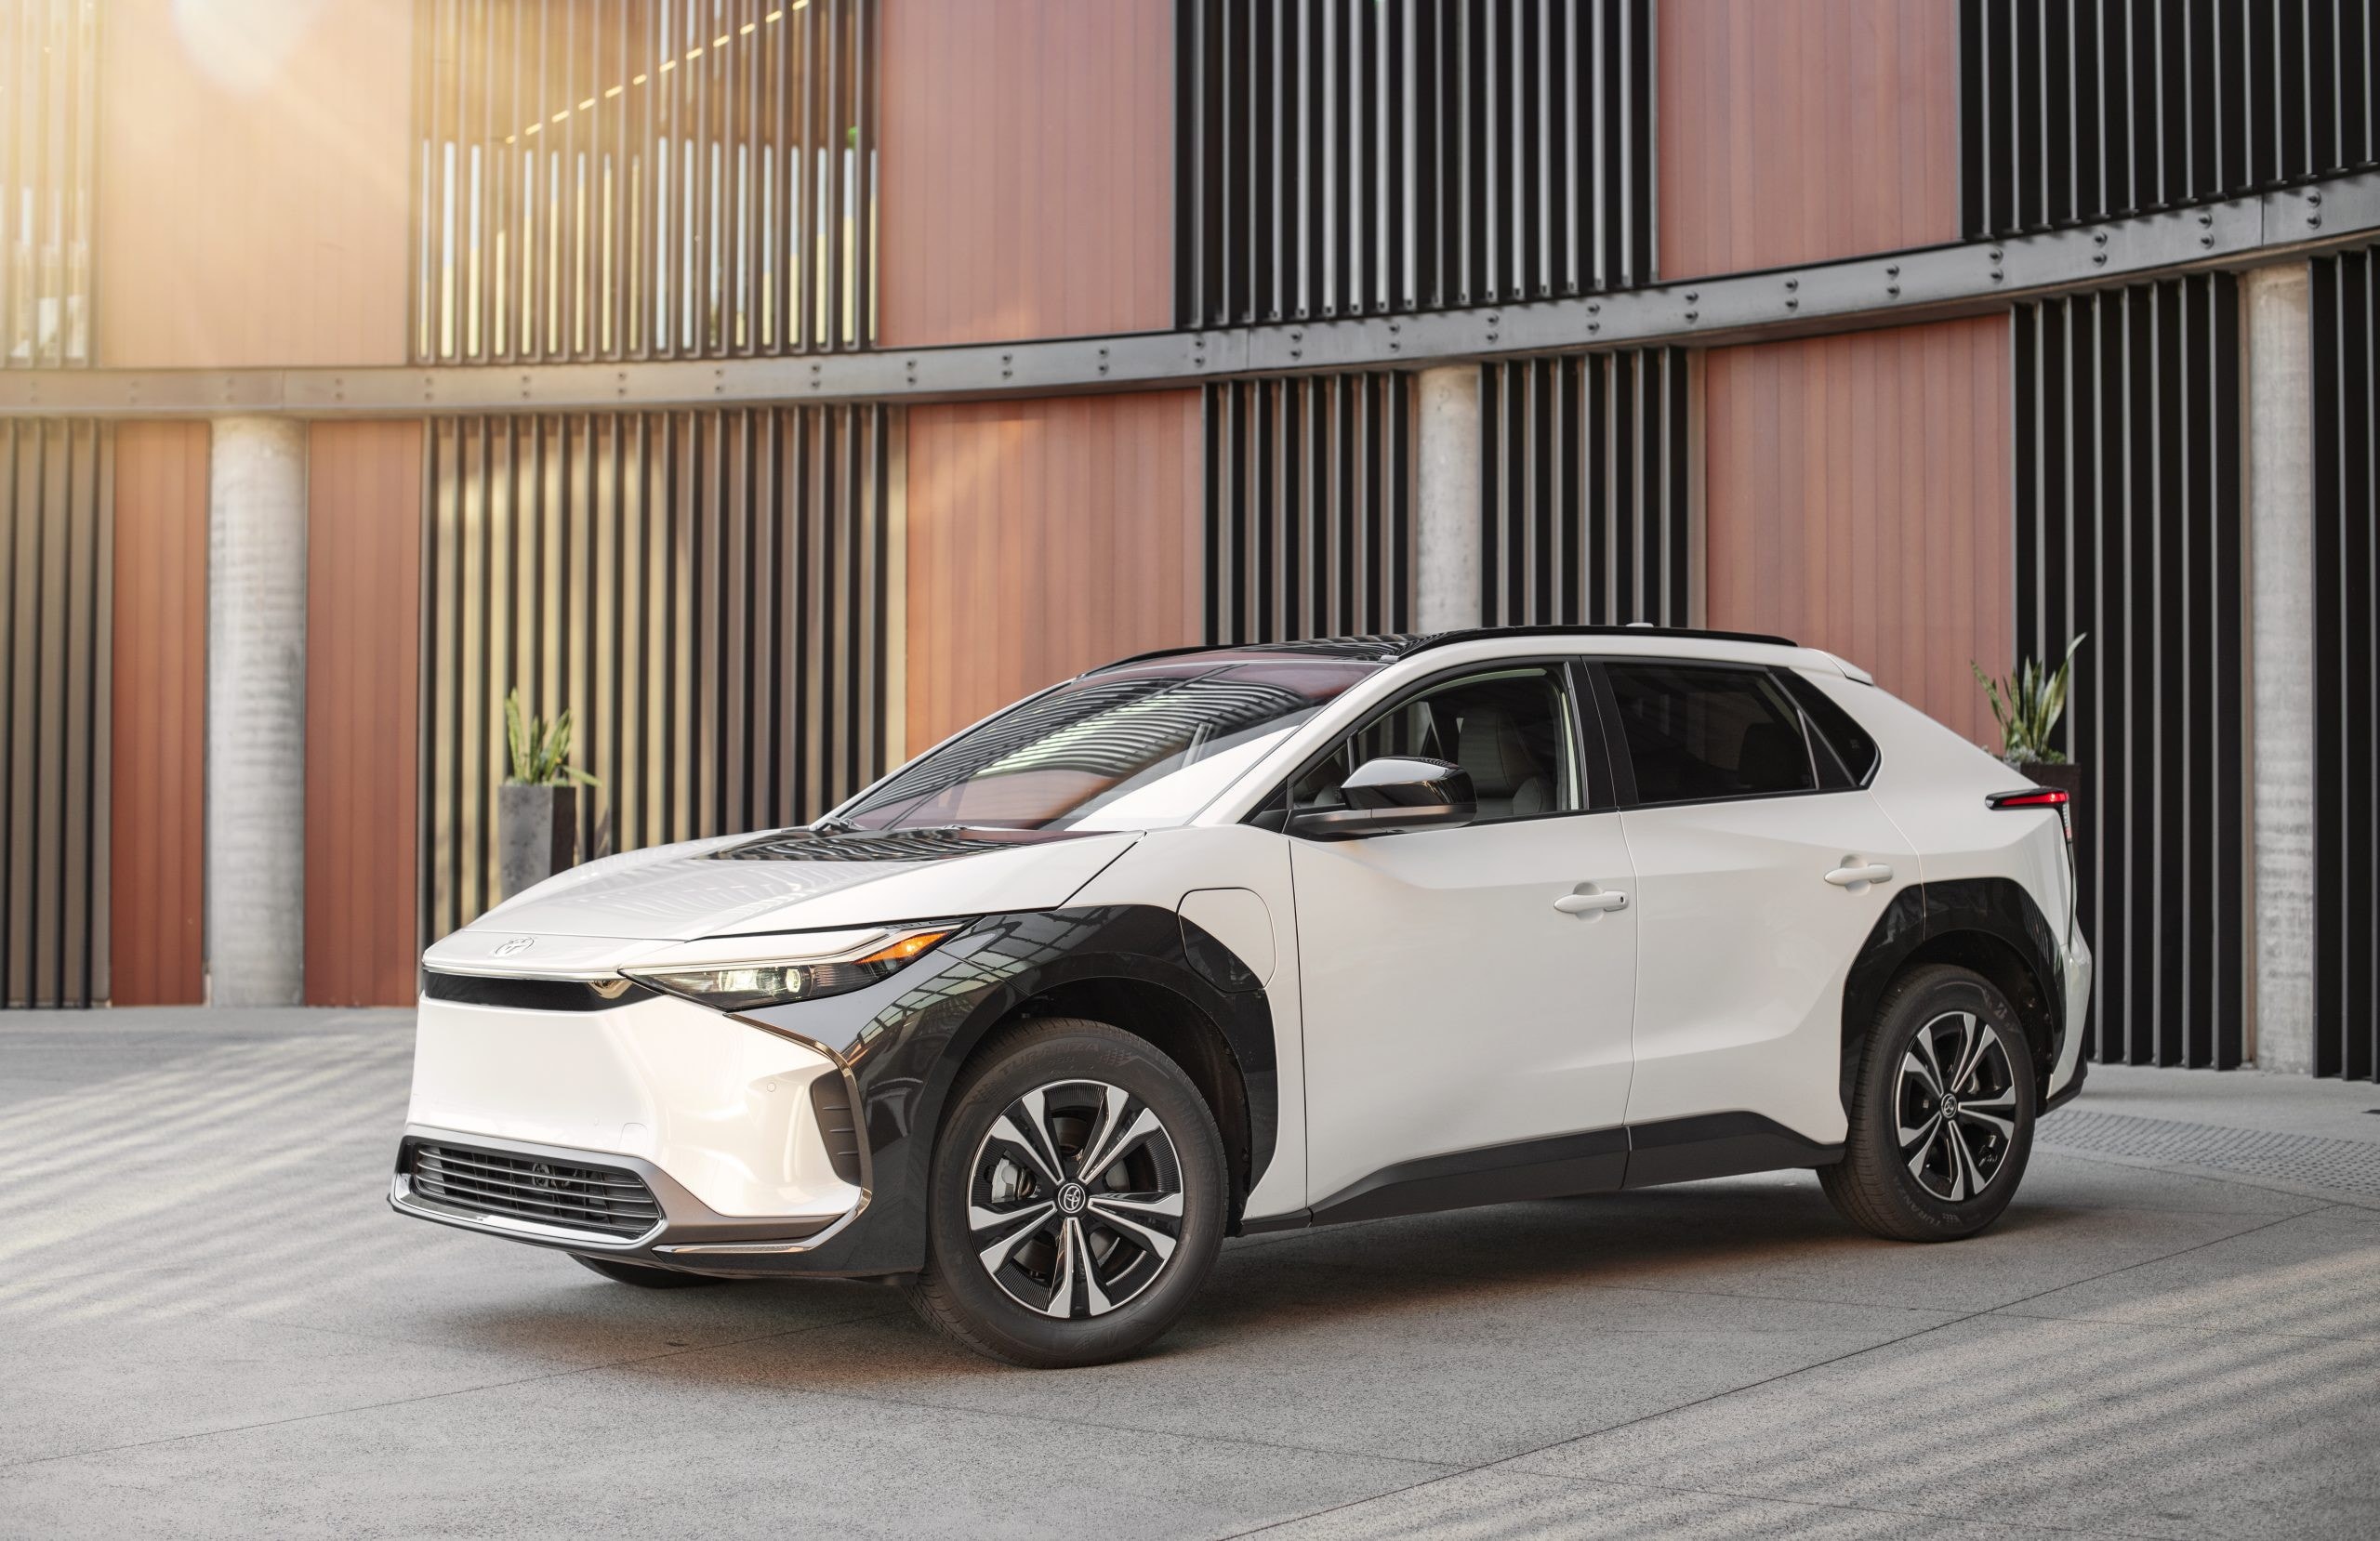 2023 Toyota bZ4X Electric Crossover Launched in the U.S., Can You Guess